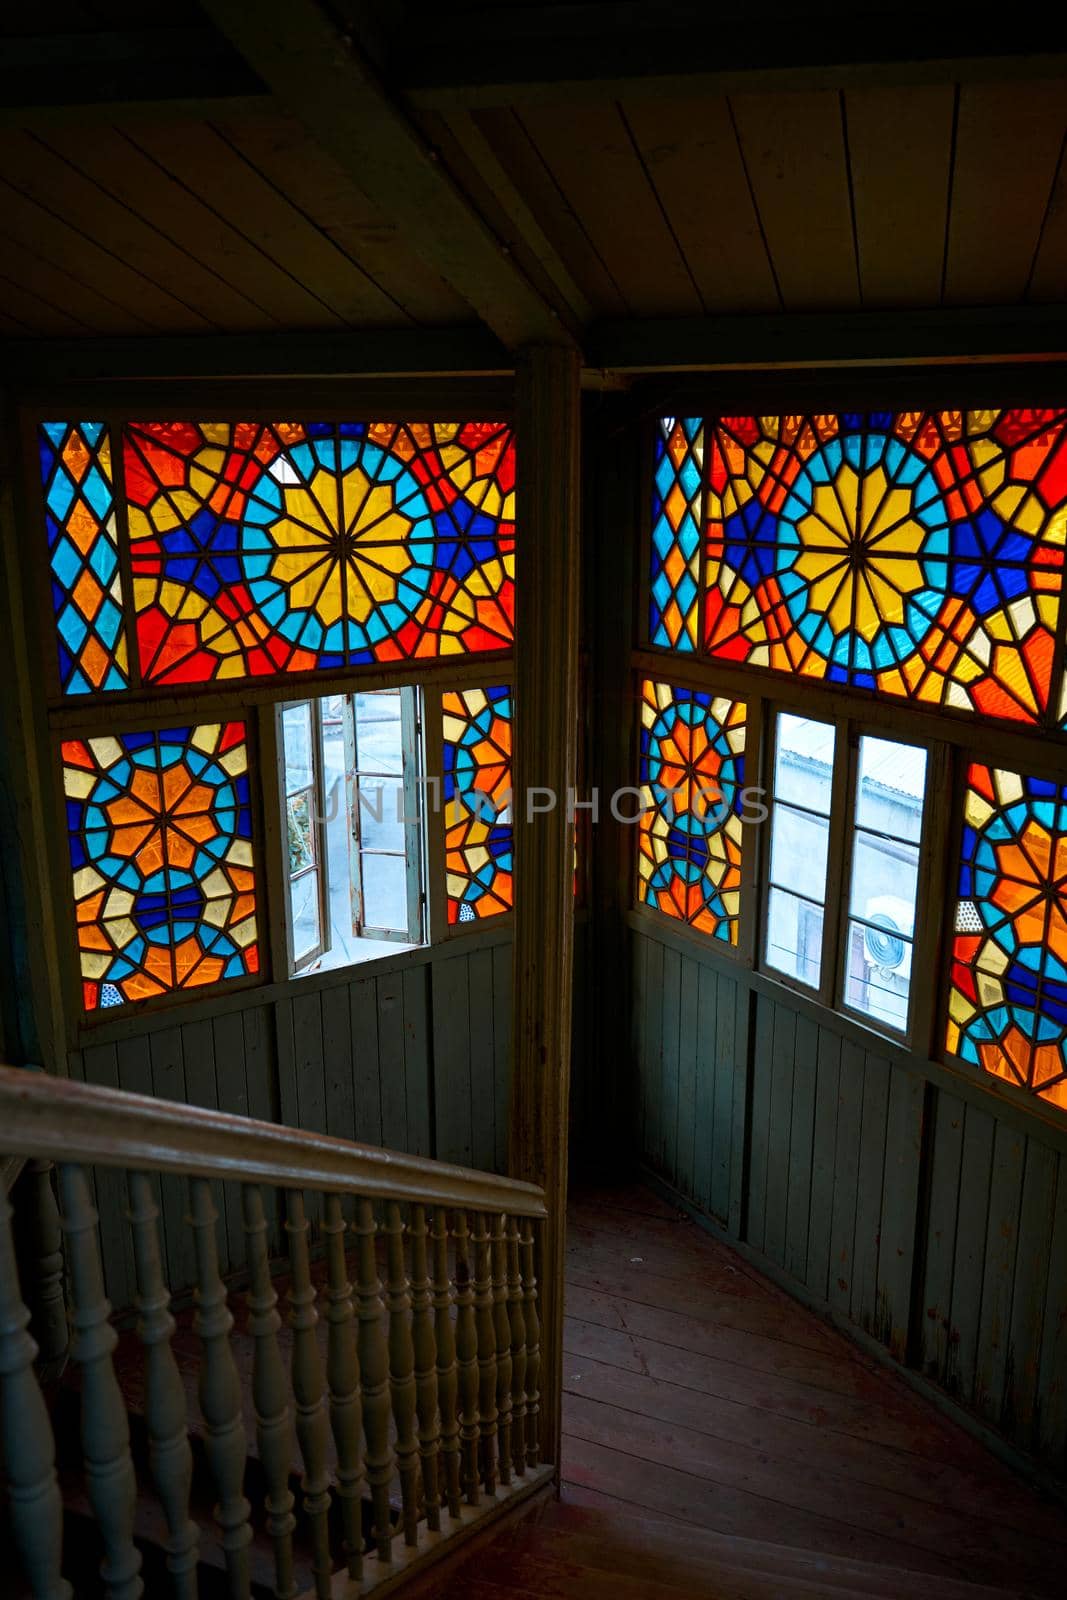 Authentic balcony of an old residential building with a stained glass window made of multicolored mosaics.